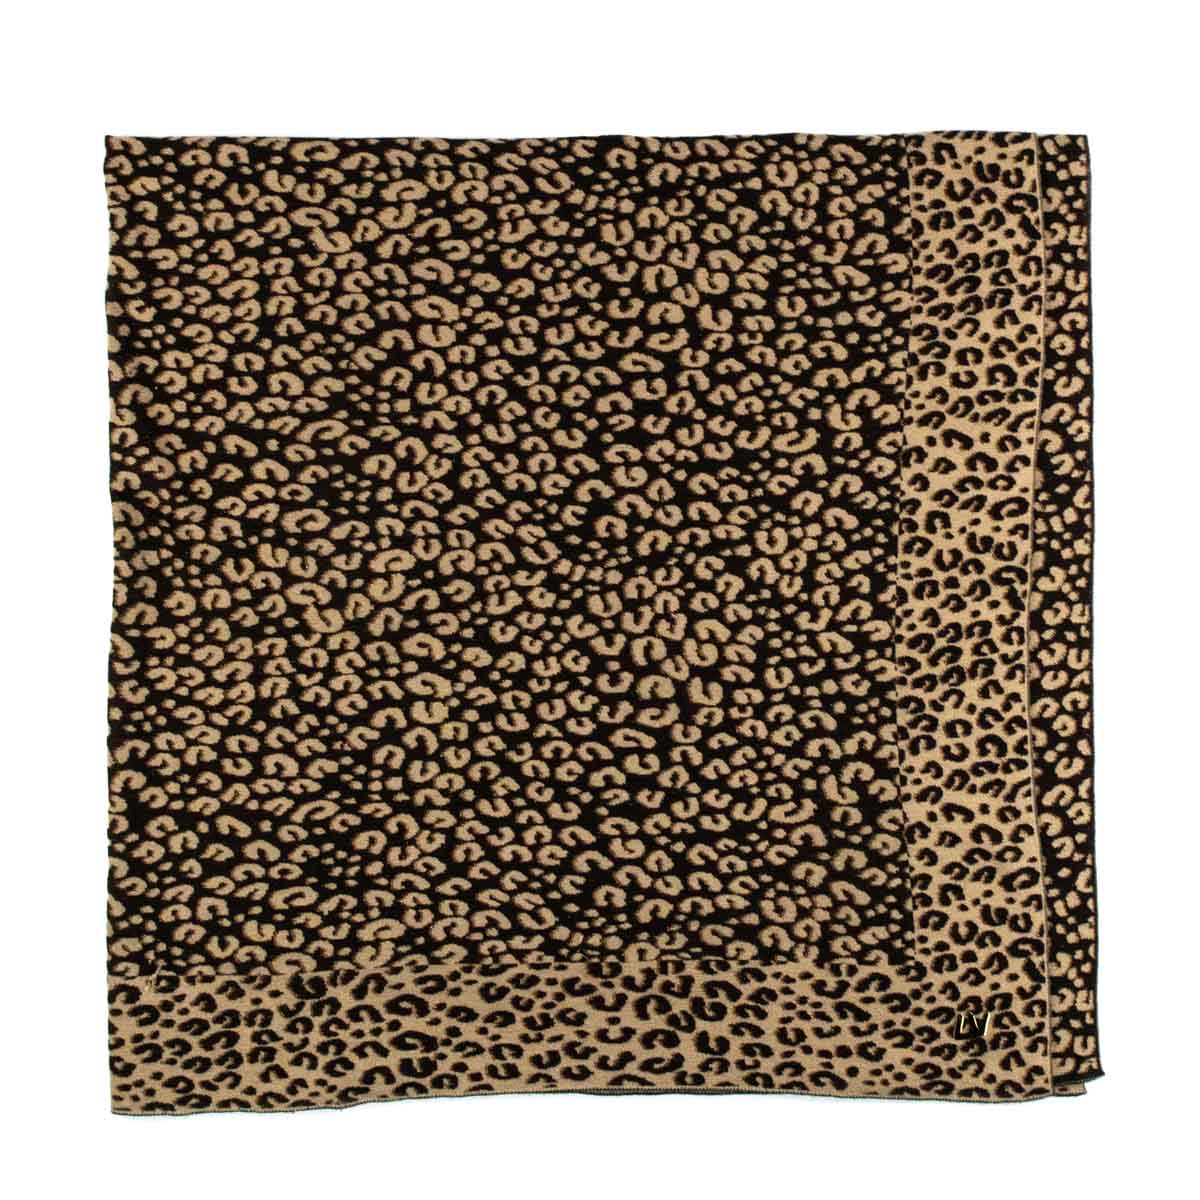 Louis Vuitton A Beige And Brown Stephen Sprouse Leopard Print Cashmere Scarf .